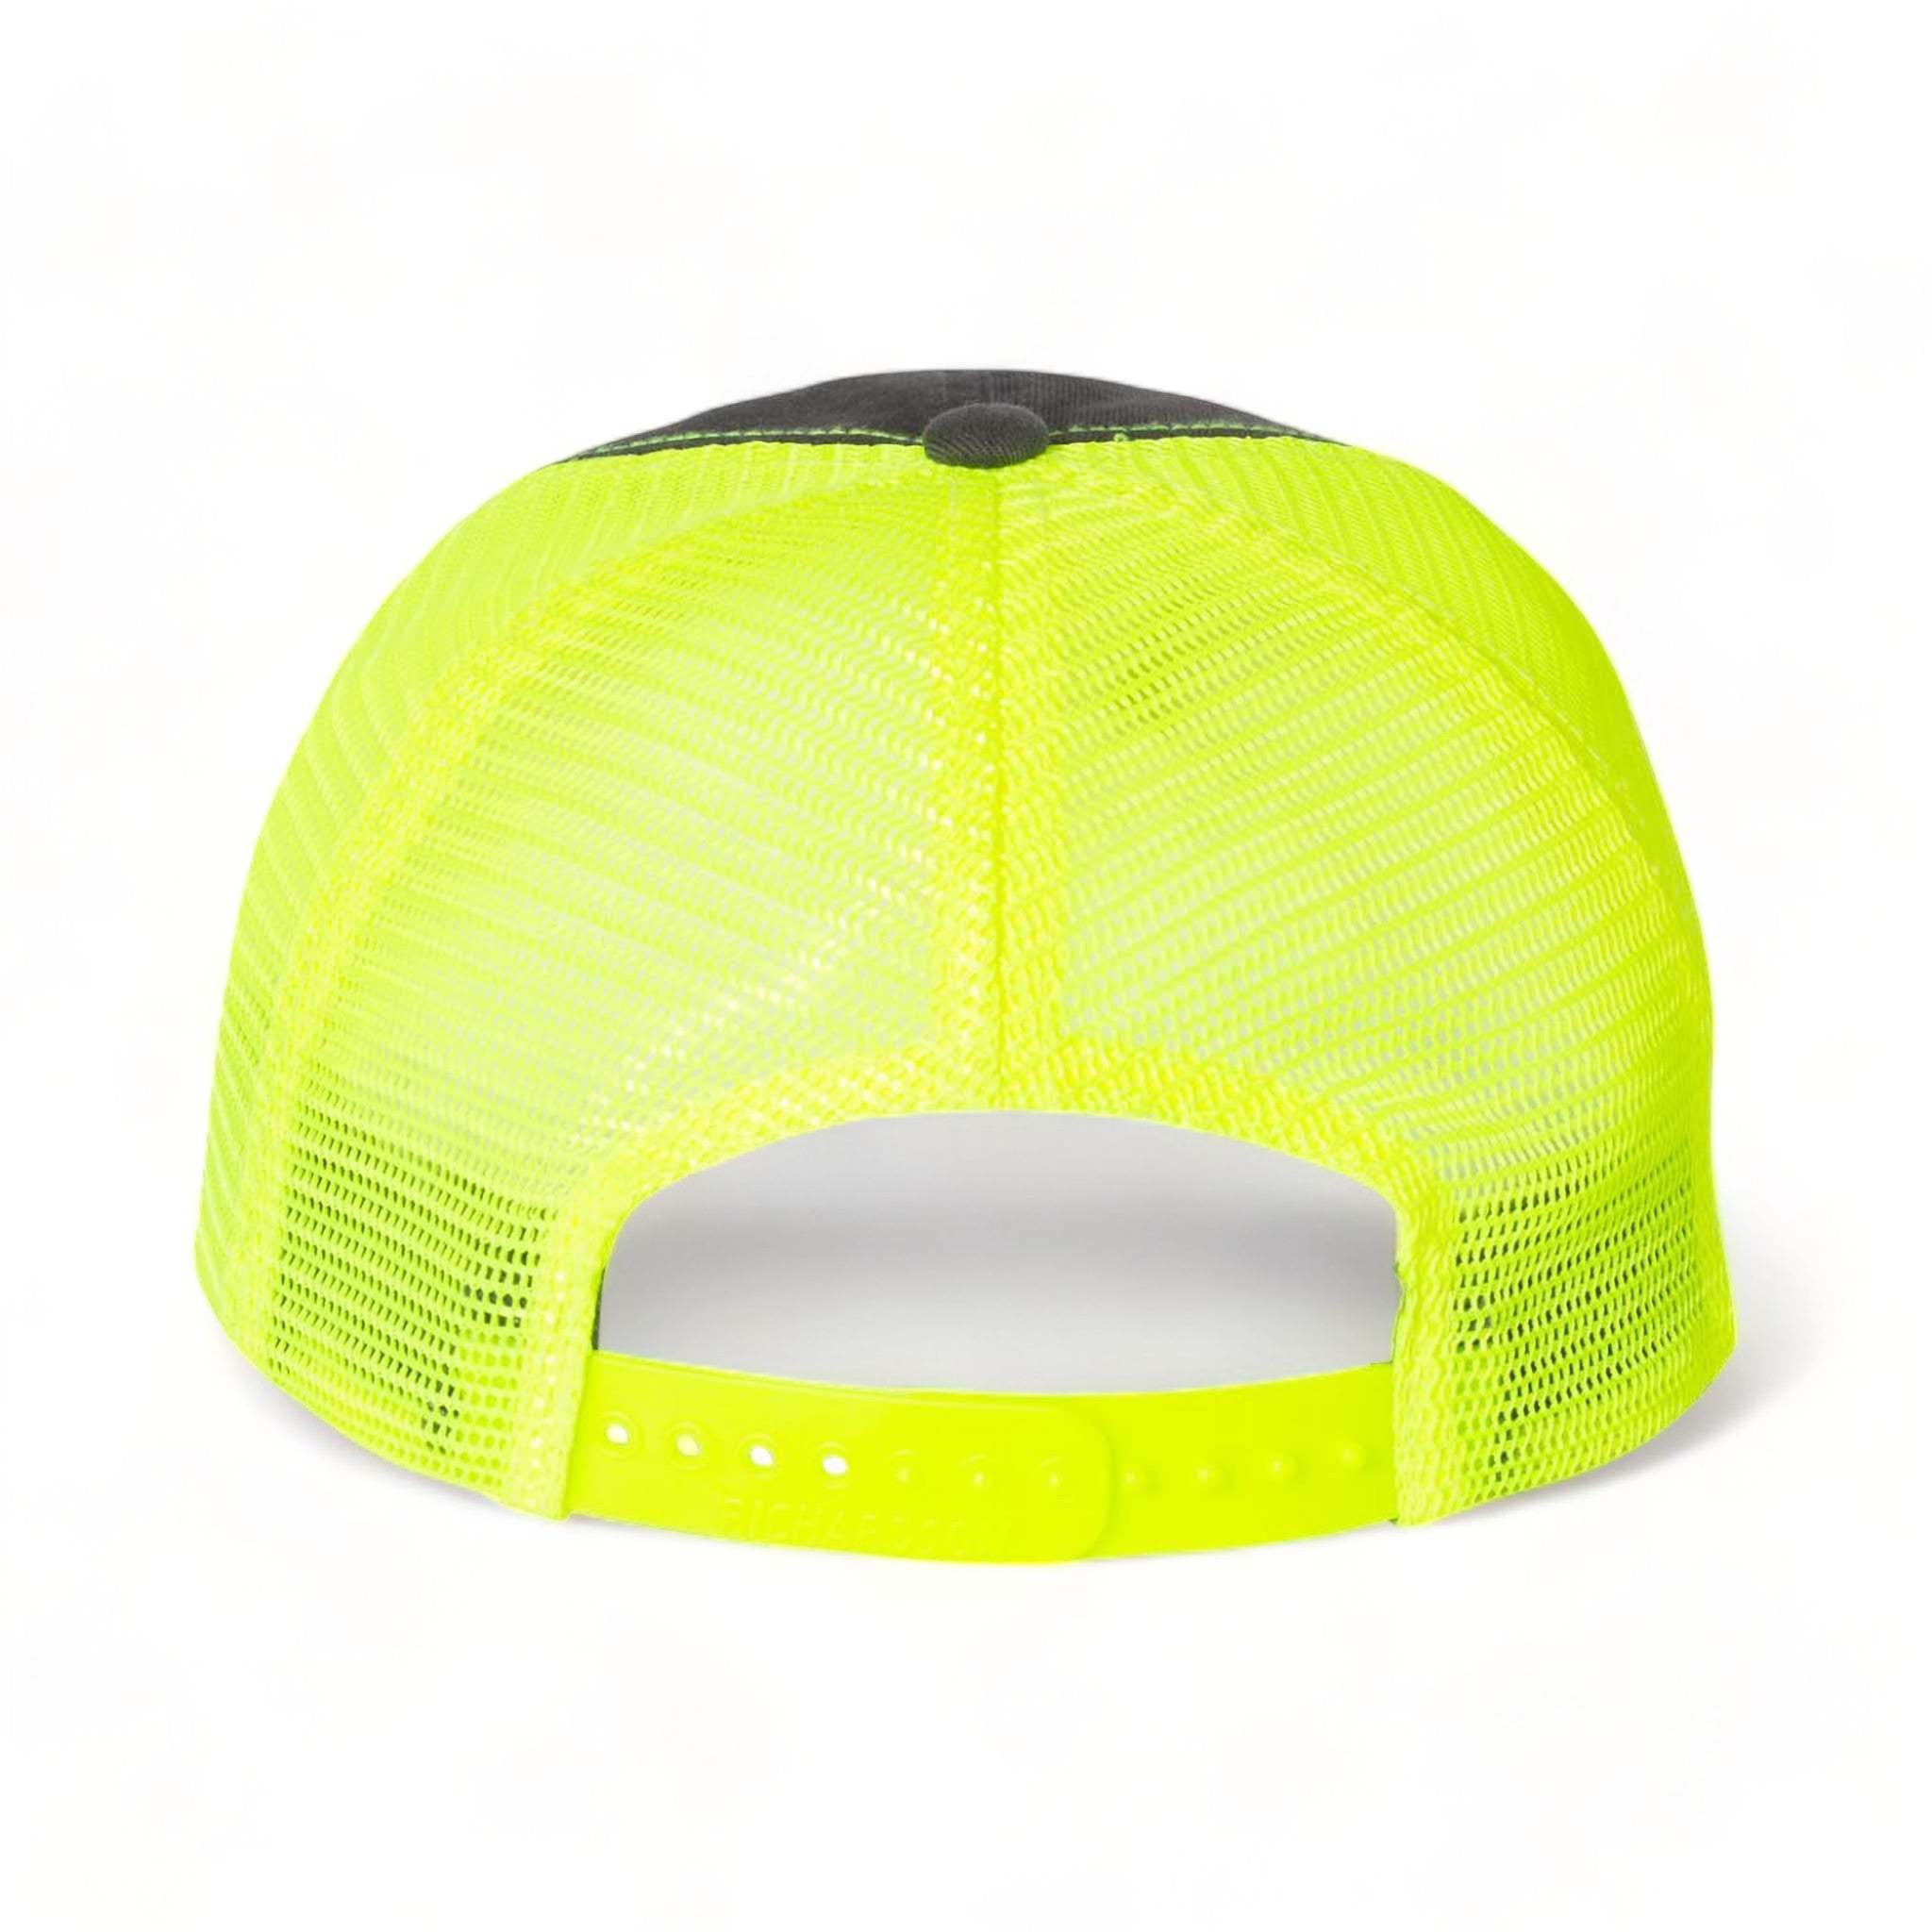 Back view of Richardson 111 custom hat in charcoal and neon yellow